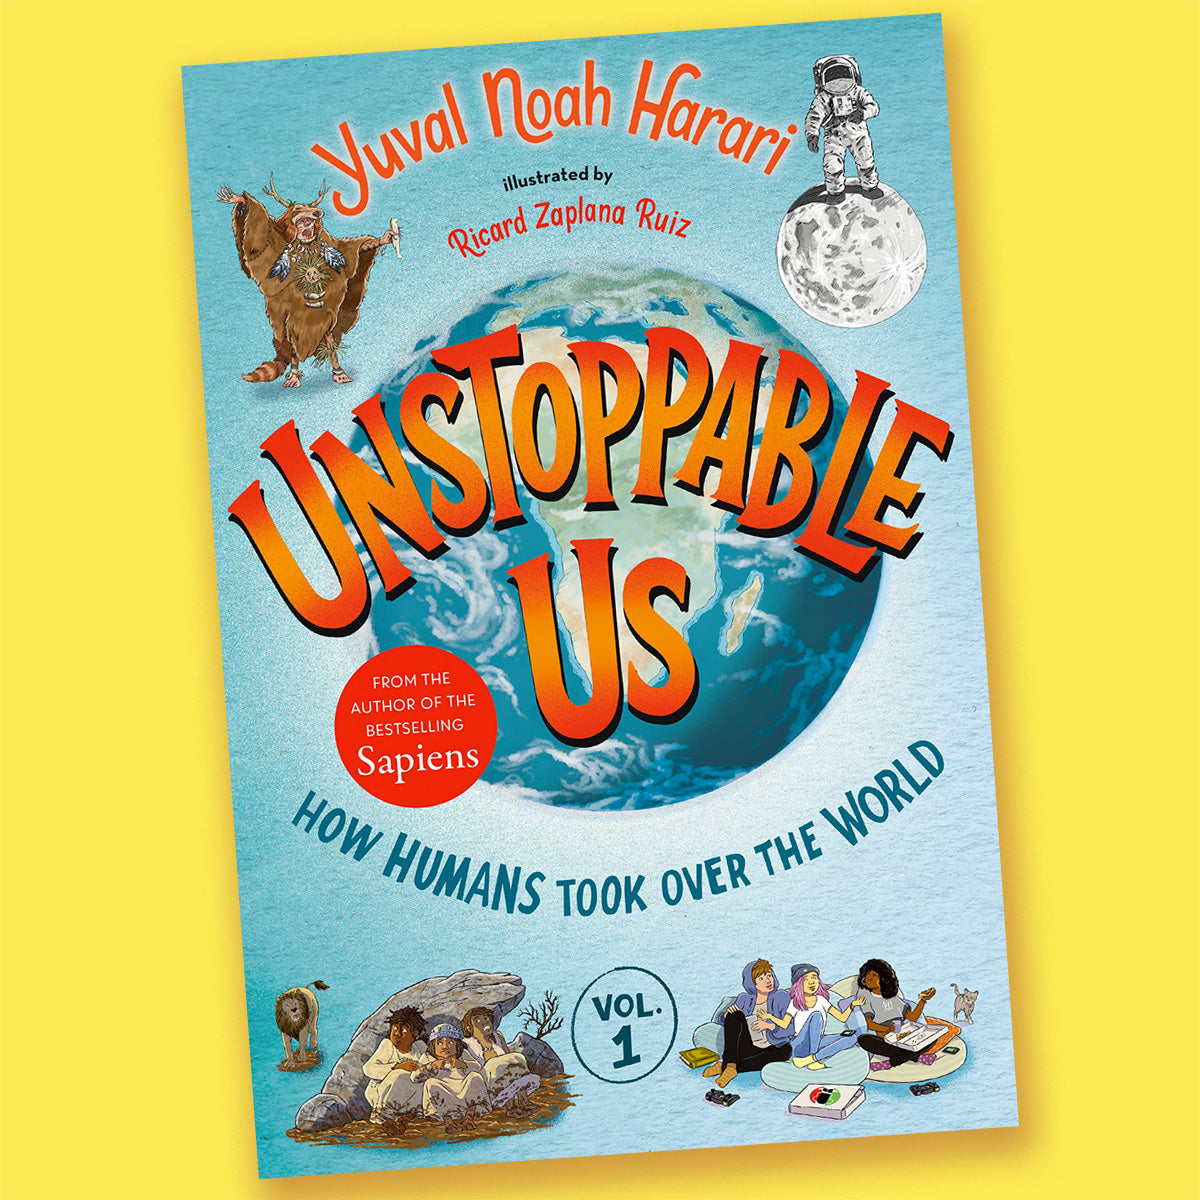 Unstoppable Us, Volume 1: How Humans Took Over the World by Yuval Noah Harari and Ricard Zaplana Ruiz